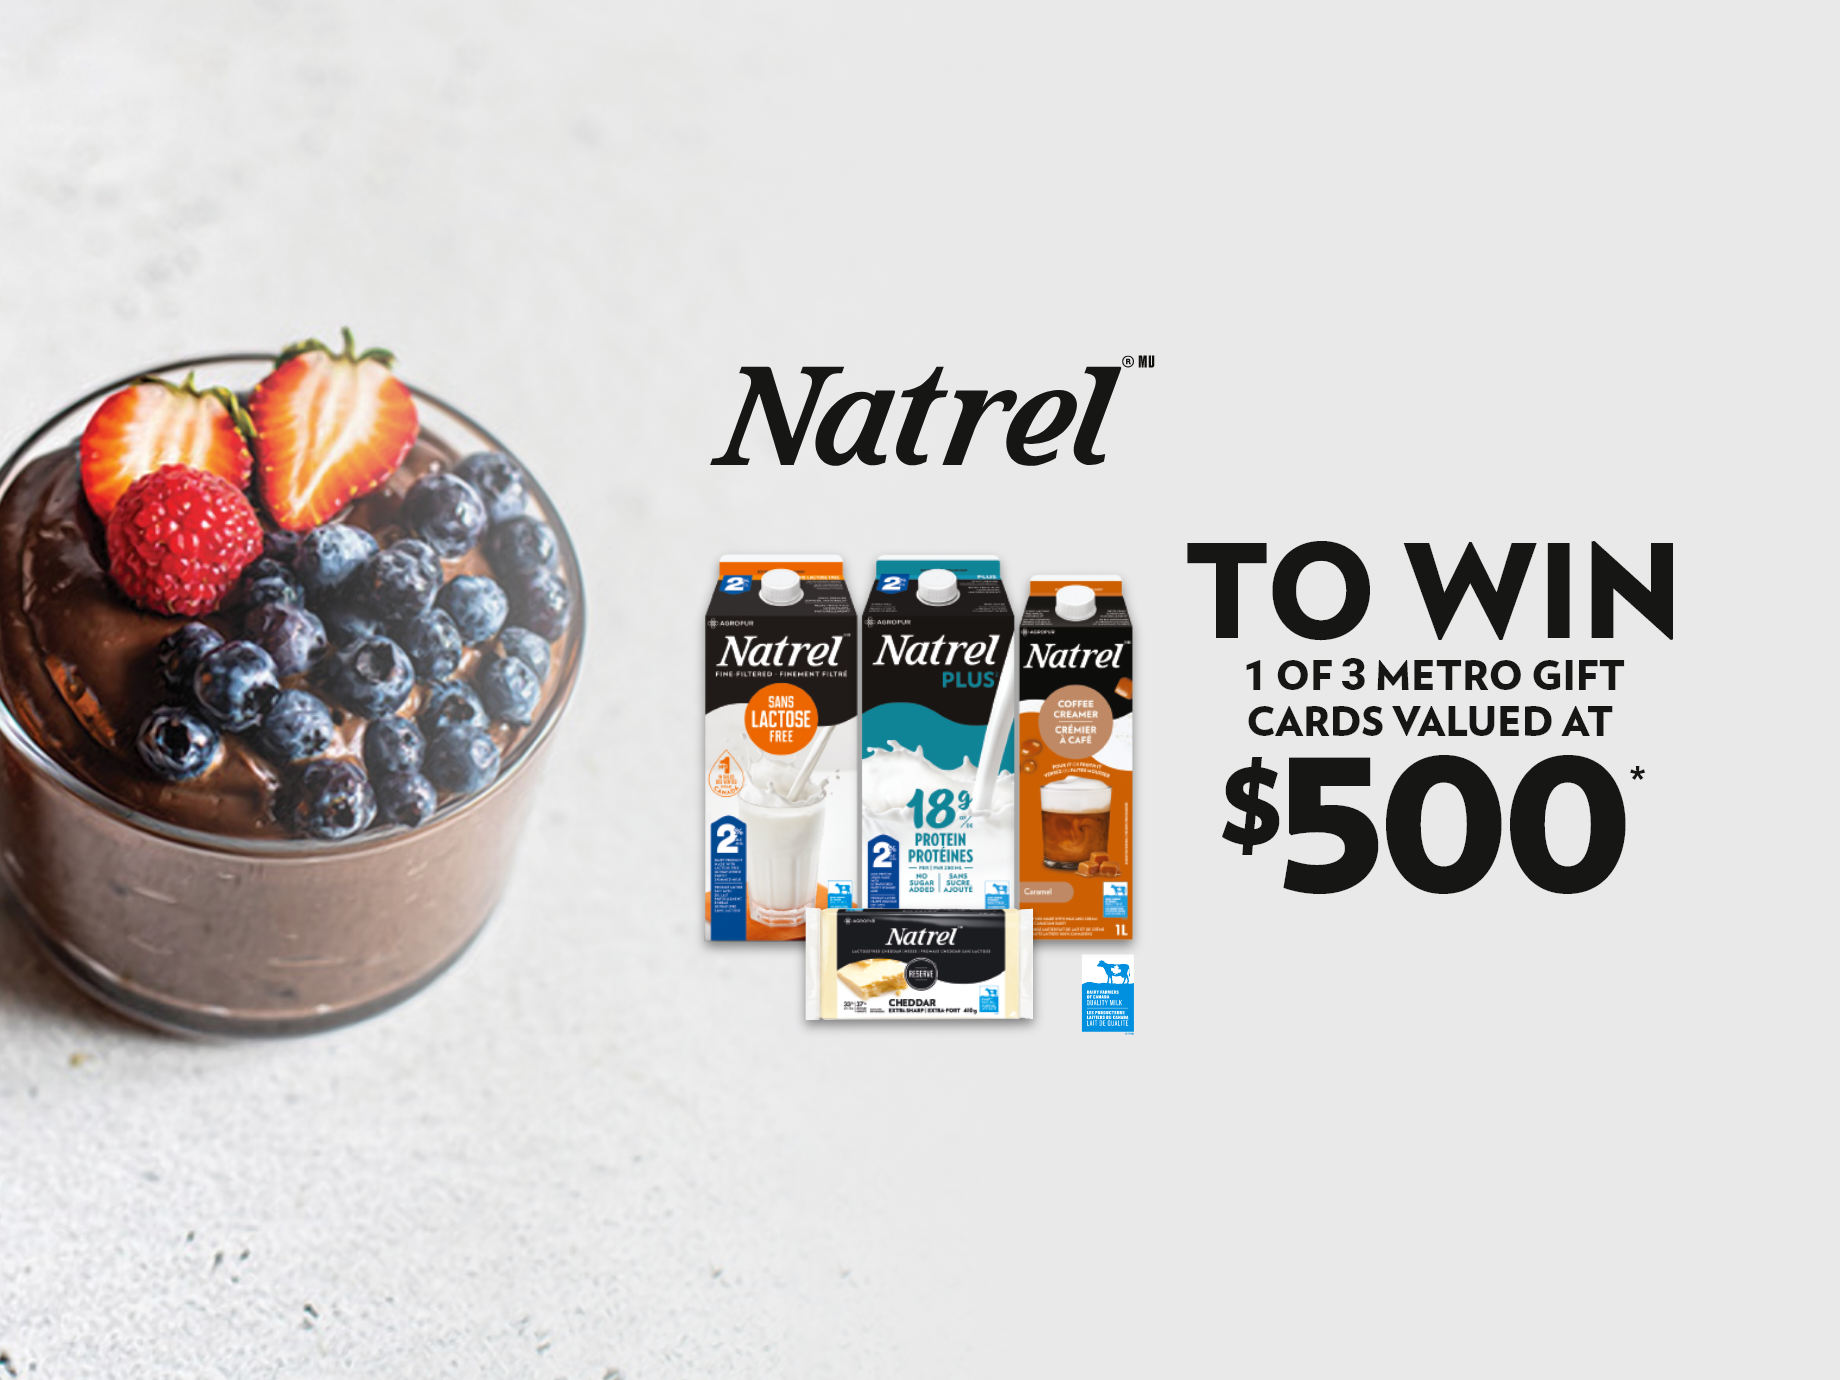 TO WIN* 1 of 3 Metro gift cards valued at $500*